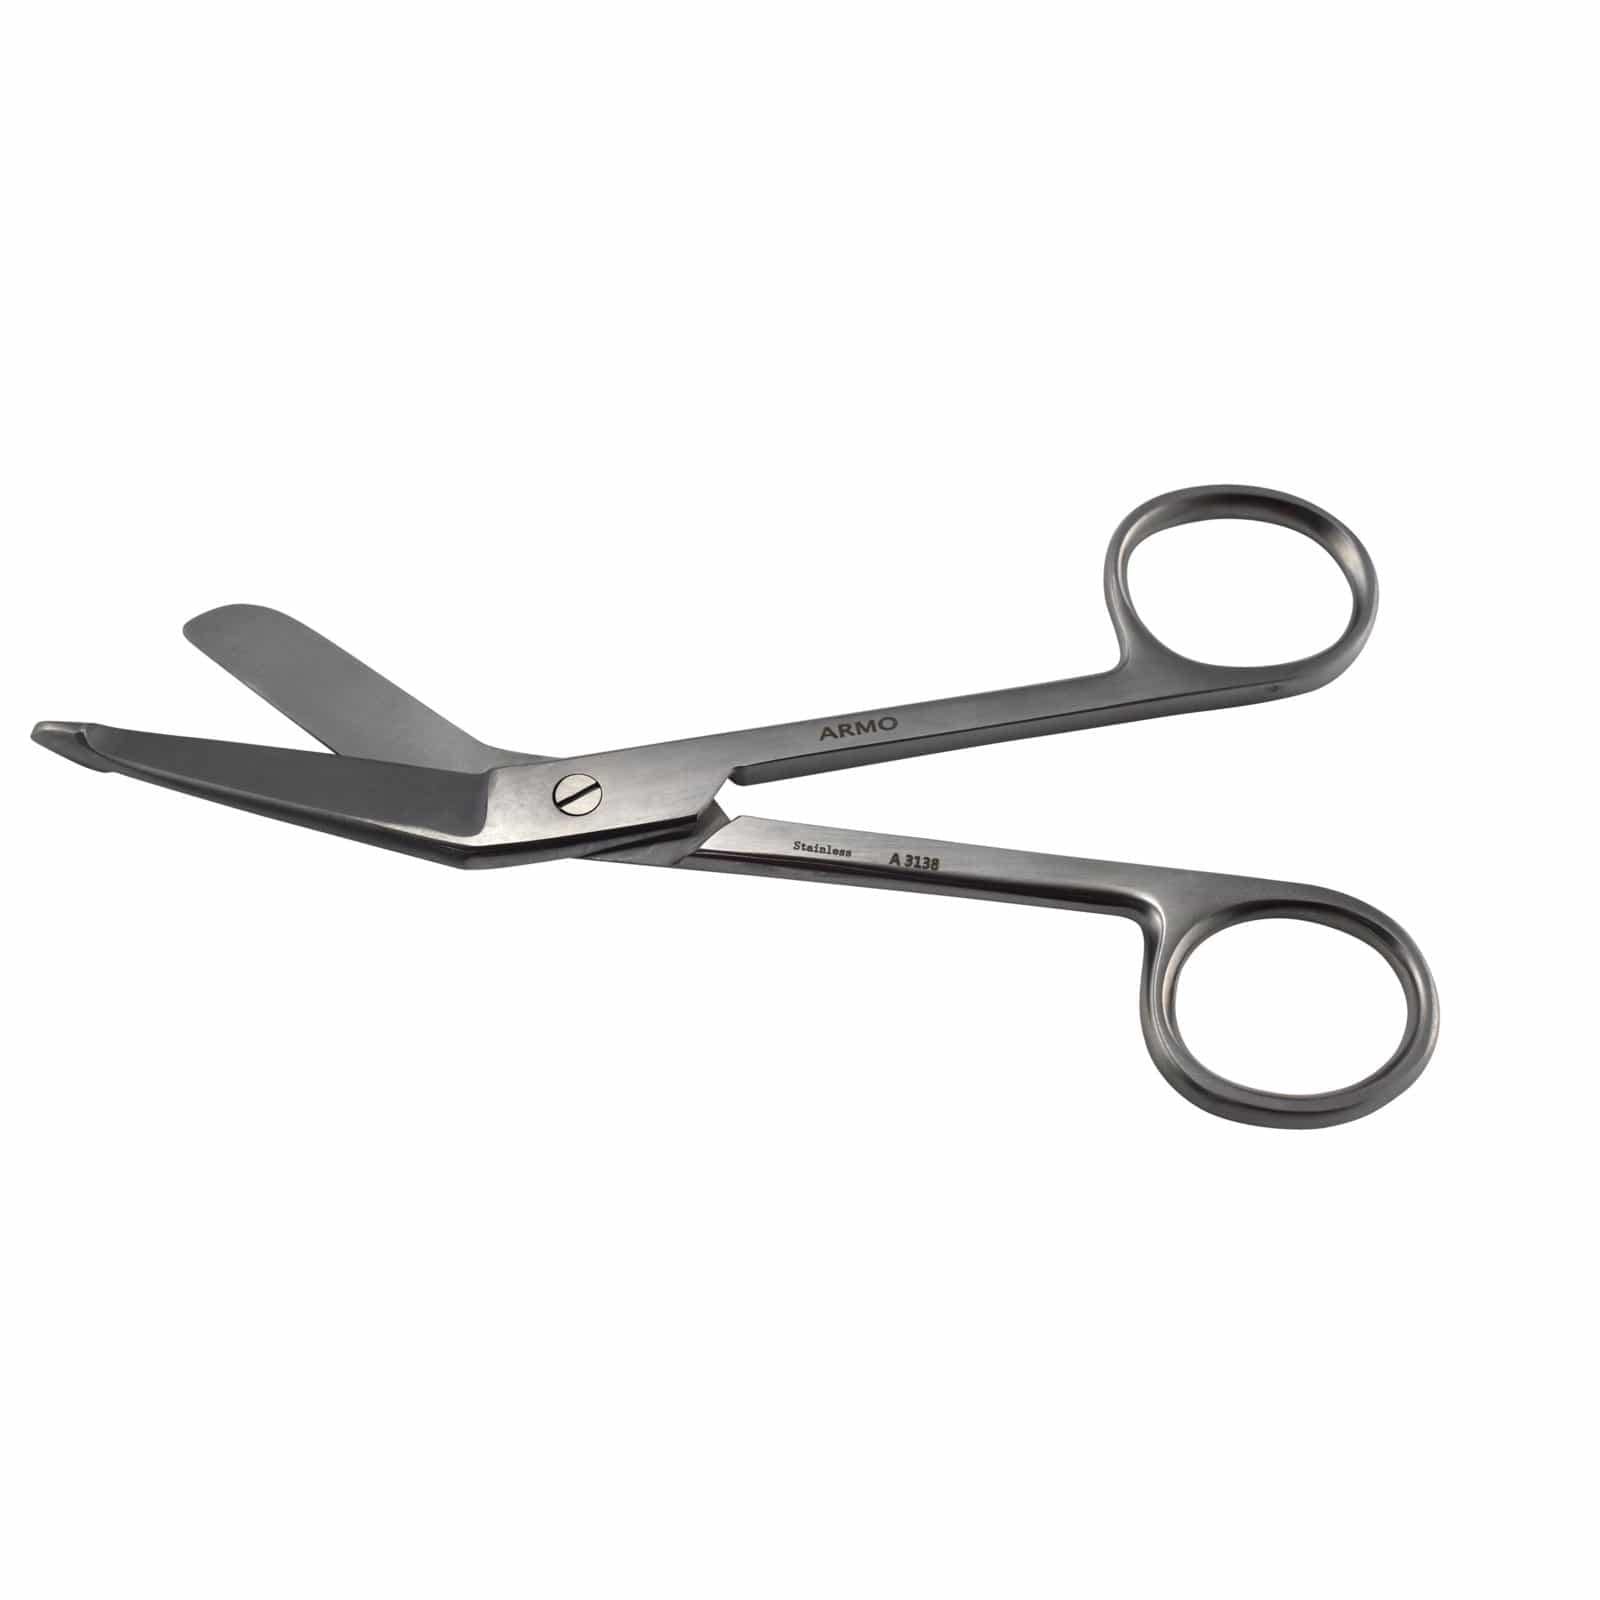 Armo Surgical Instruments 14cm Armo Scissors Bandage Lister